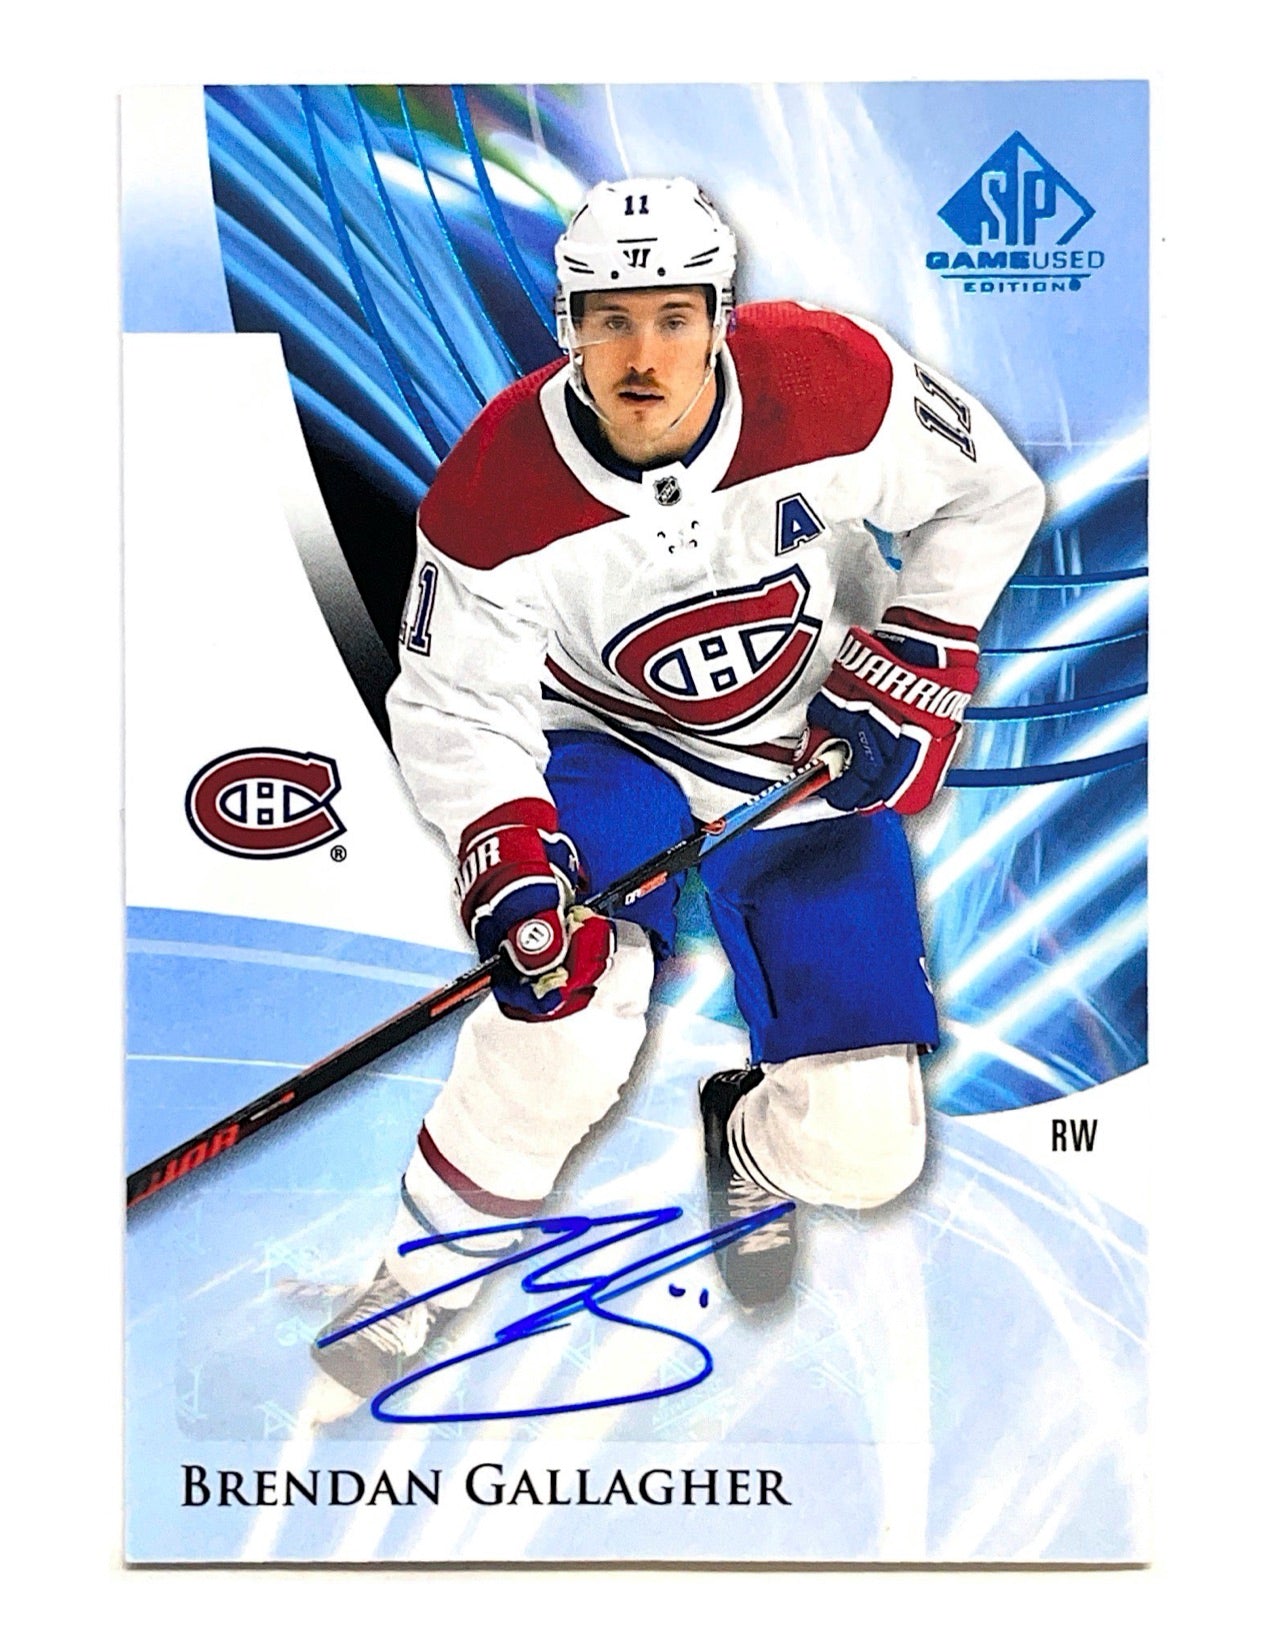 Brendan Gallagher 2020-21 Upper Deck SP Game Used Autograph #28